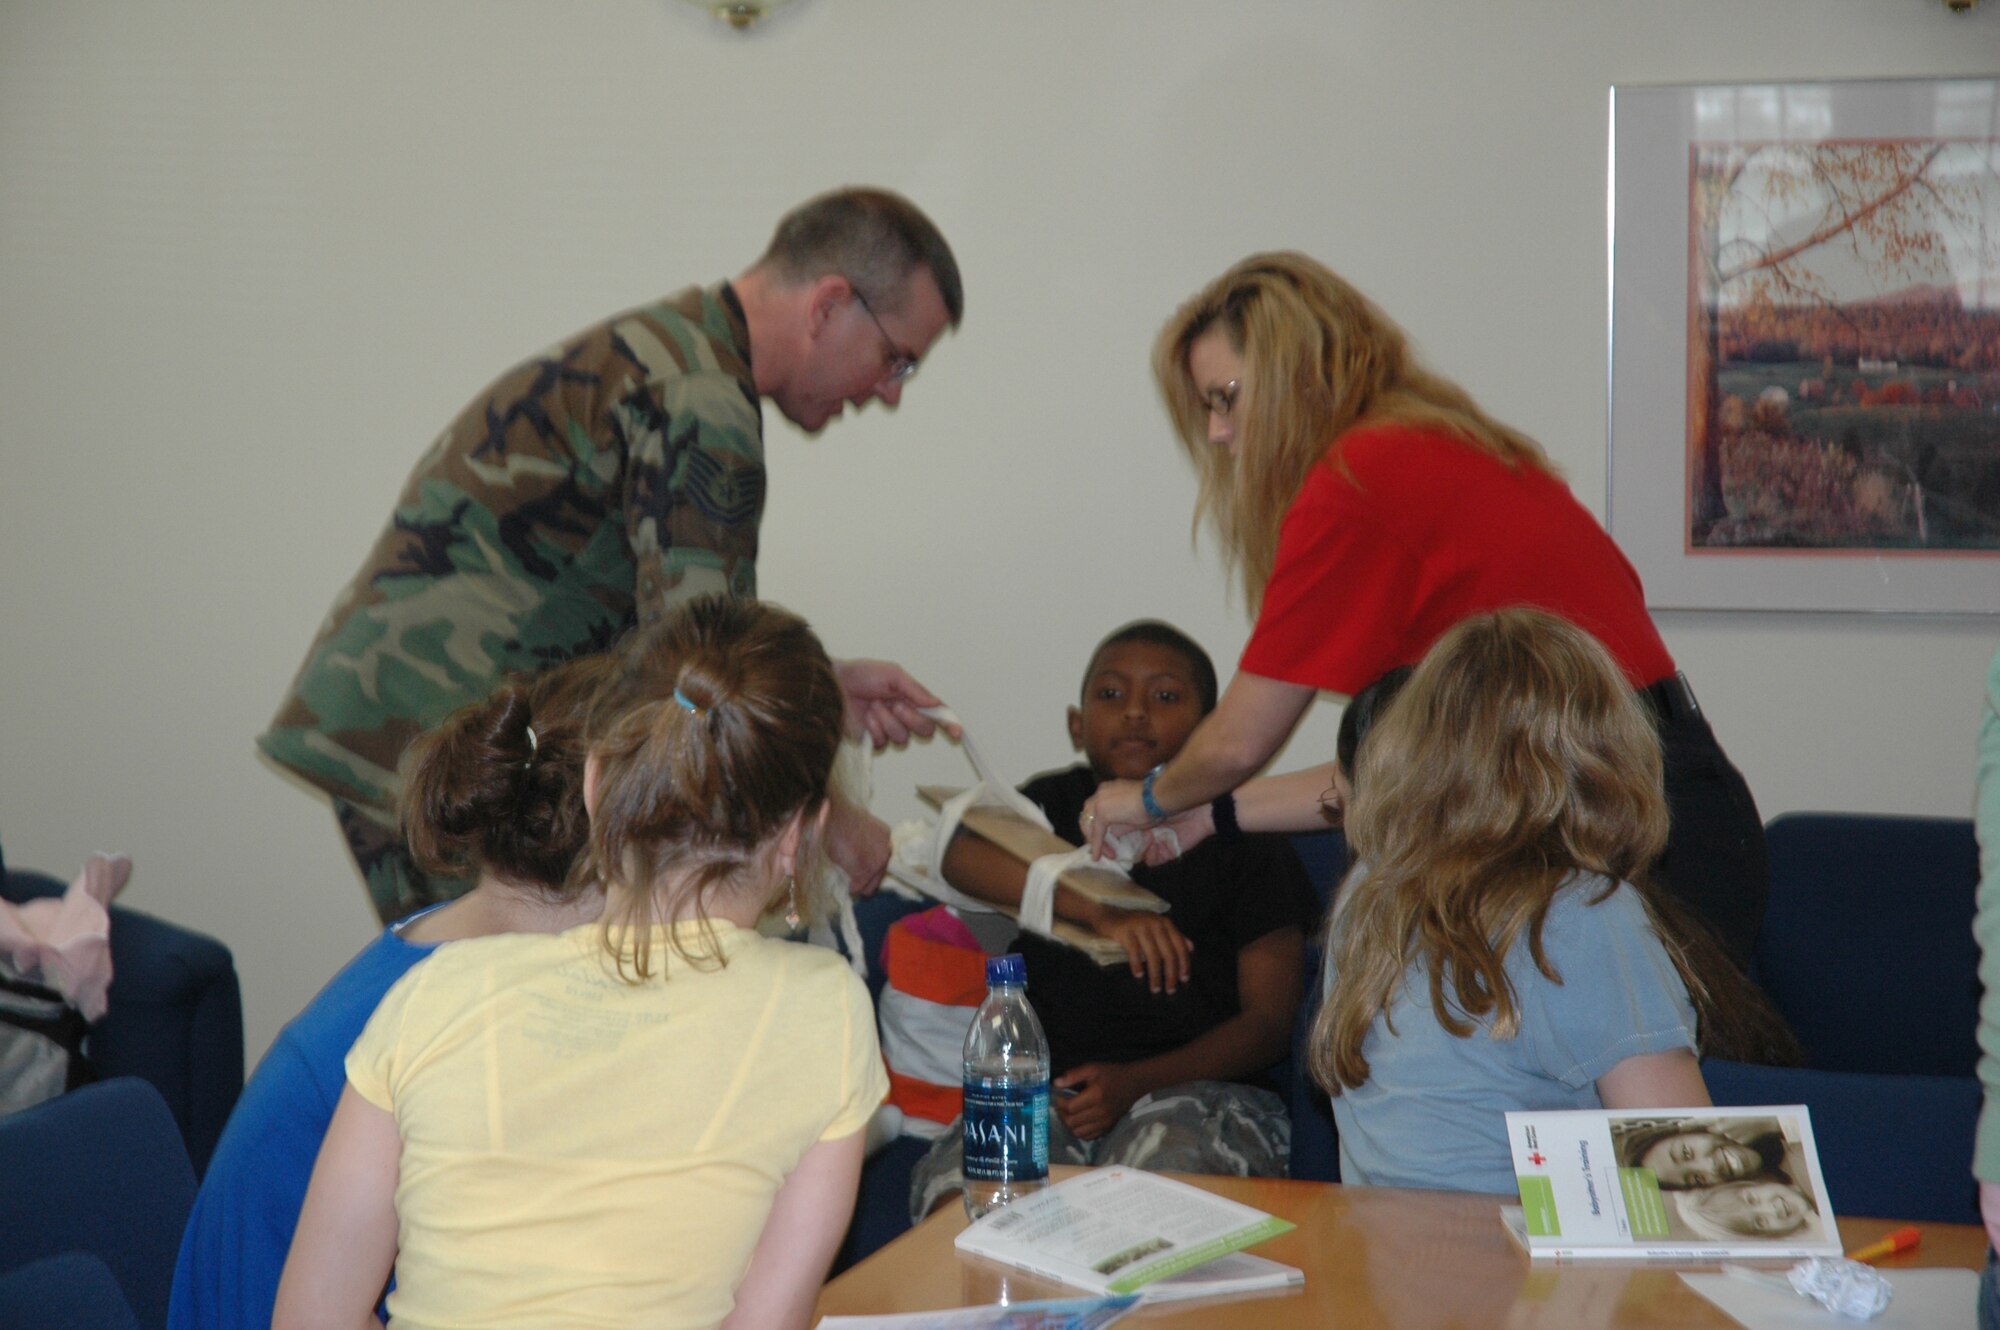 WESTOVER AIR RESERVE BASE, Mass. -- Master Sgt. Matt Dallachie,439th AMDS, and Certified Health and Safety Instructor Nikki Linder demonstrate proper securing and bandaging of a young volunteer at the Babysitter's Training Course at the Family Readiness Center at Westover Air Reserve Base. A program offered by Westover to Miltary, DOD Civilian and Contractor's dependents, this two-day course offers hands-on activities, interactive video and lively discussions that teaches young people how to care for young children, handle emergencies such as injuries, illnesses and household accidents, be good leaders and role models. 